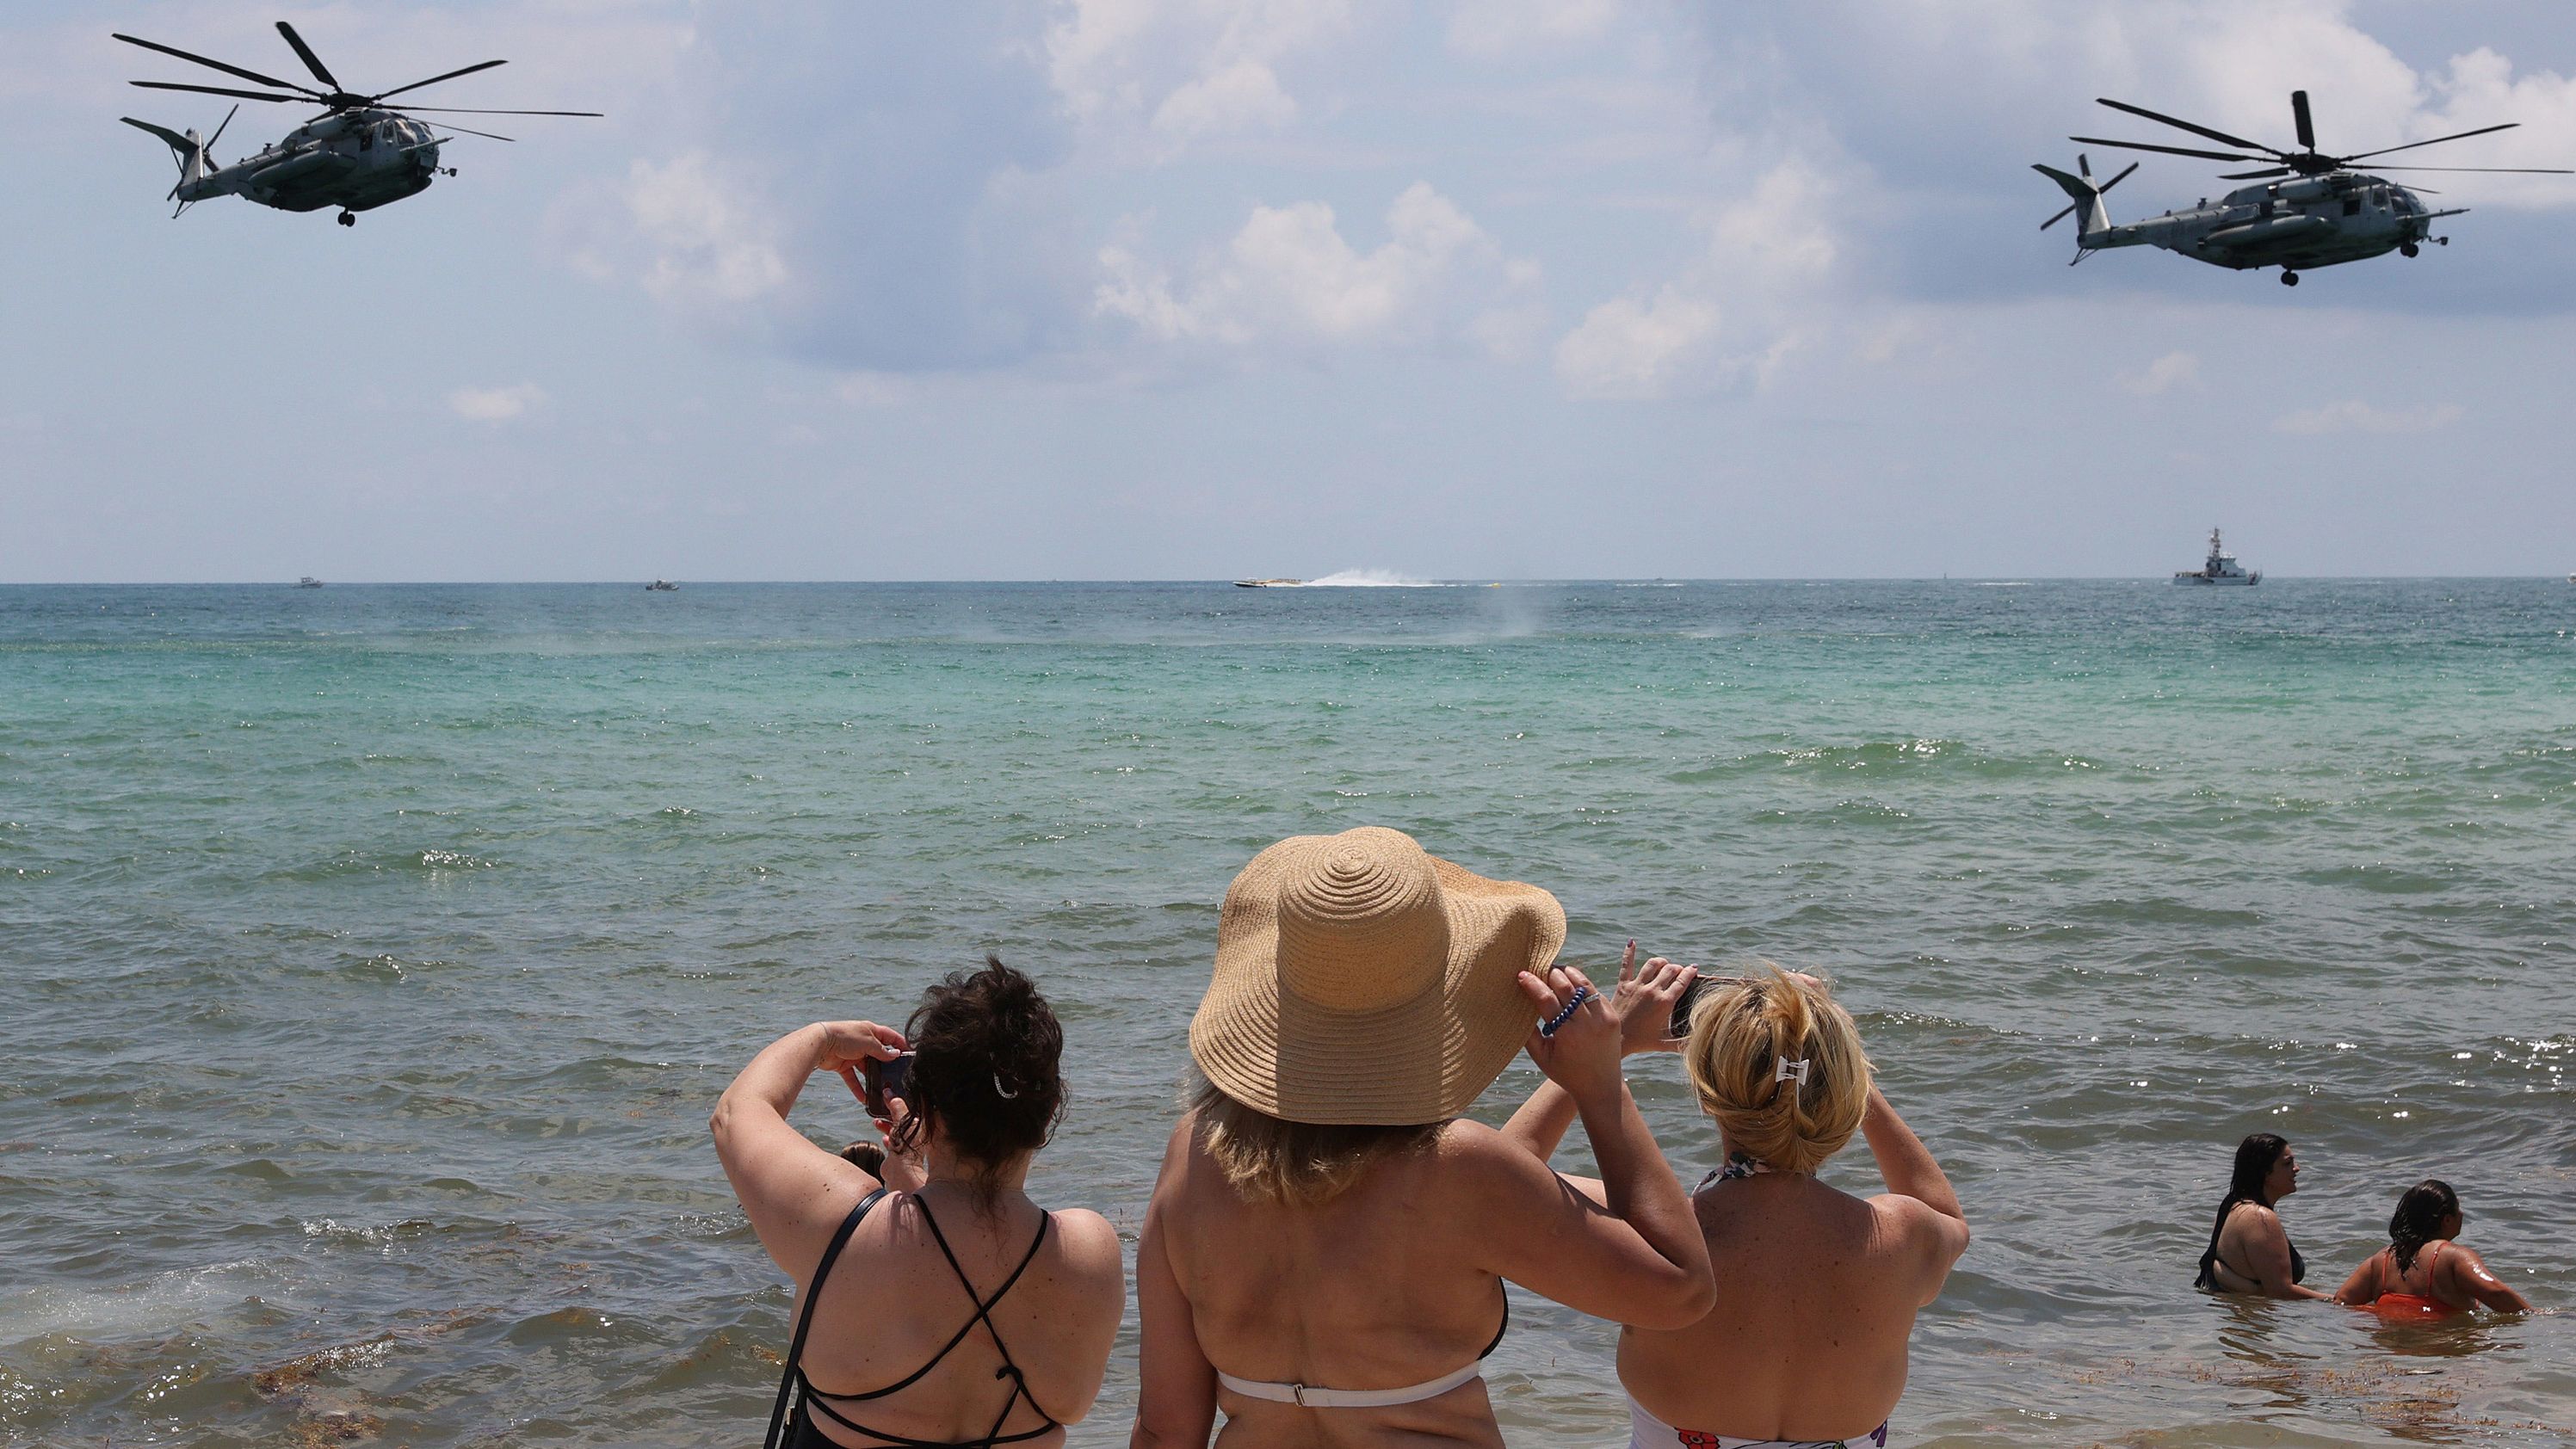 Beachgoers watch as US Marine helicopters practice maneuvers Friday for an air and sea show in Miami Beach, Florida.